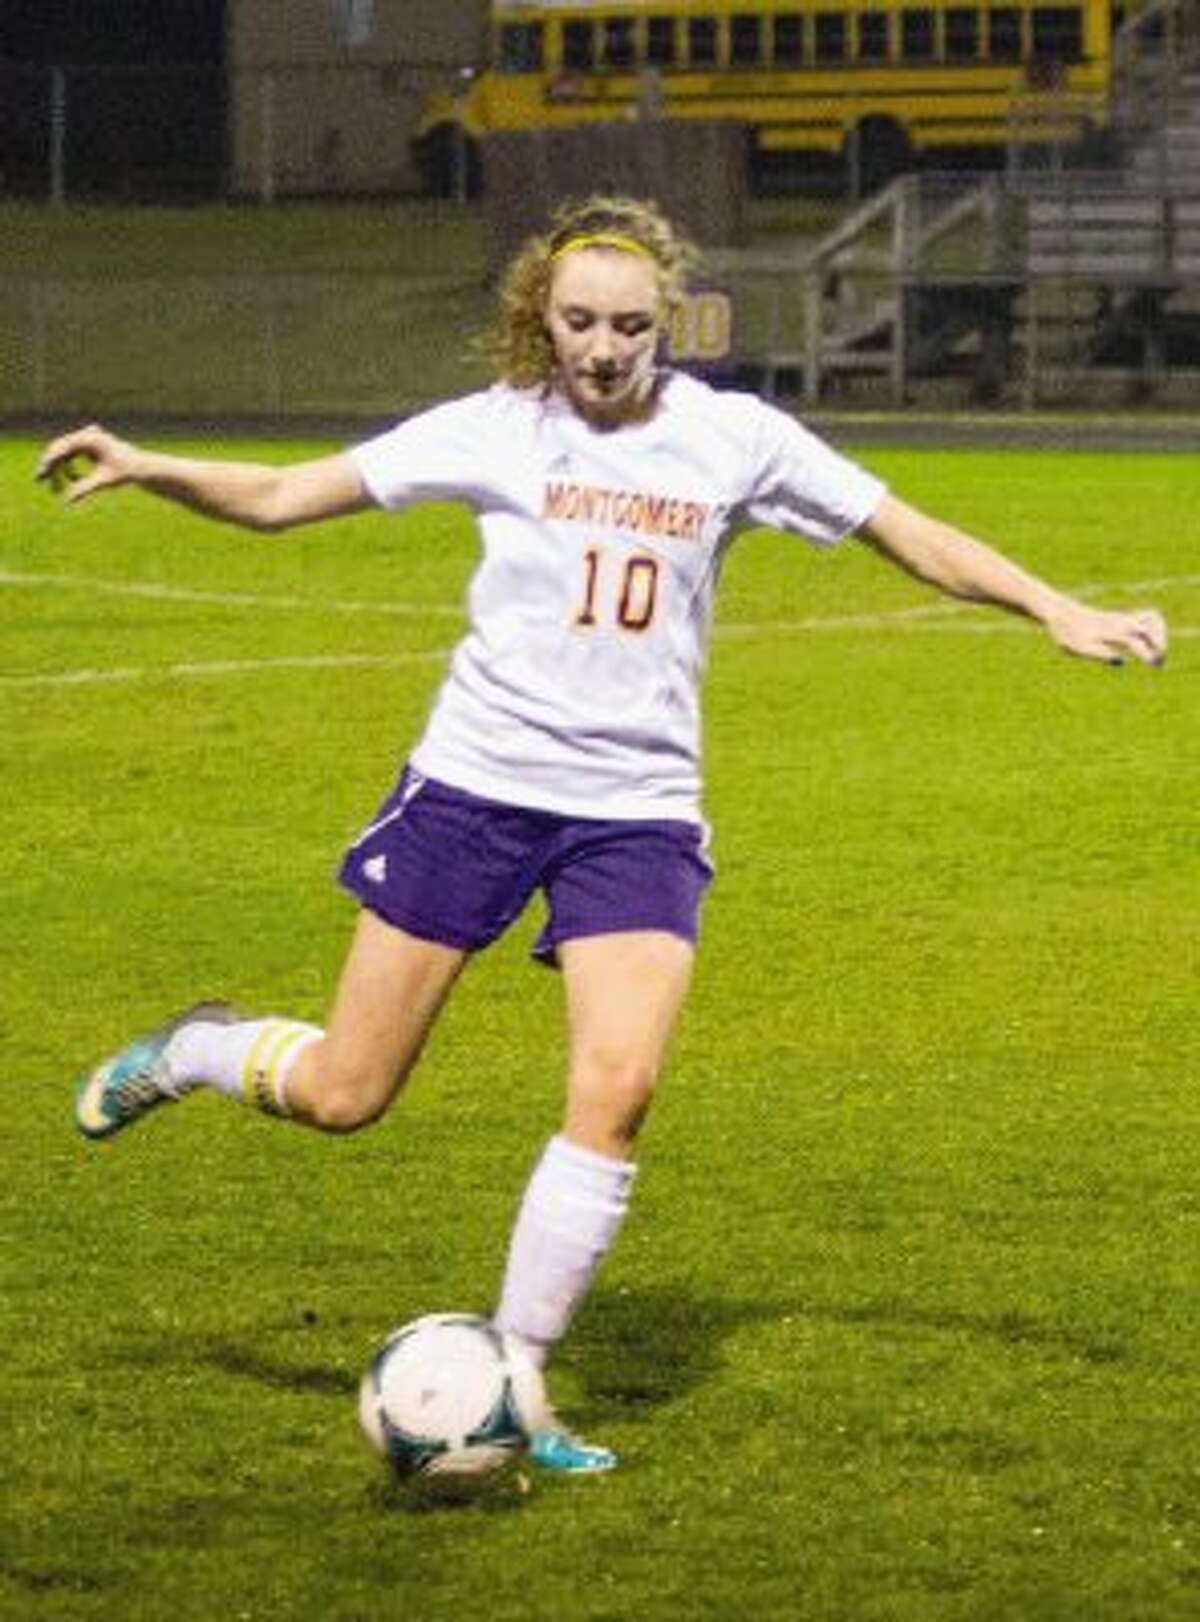 Montgomery’s Hannah Hoke kicks the ball during a match against Huntsville on Tuesday night at Montgomery High School. To view or purchase this photo and others like it, visit HCNpics.com.